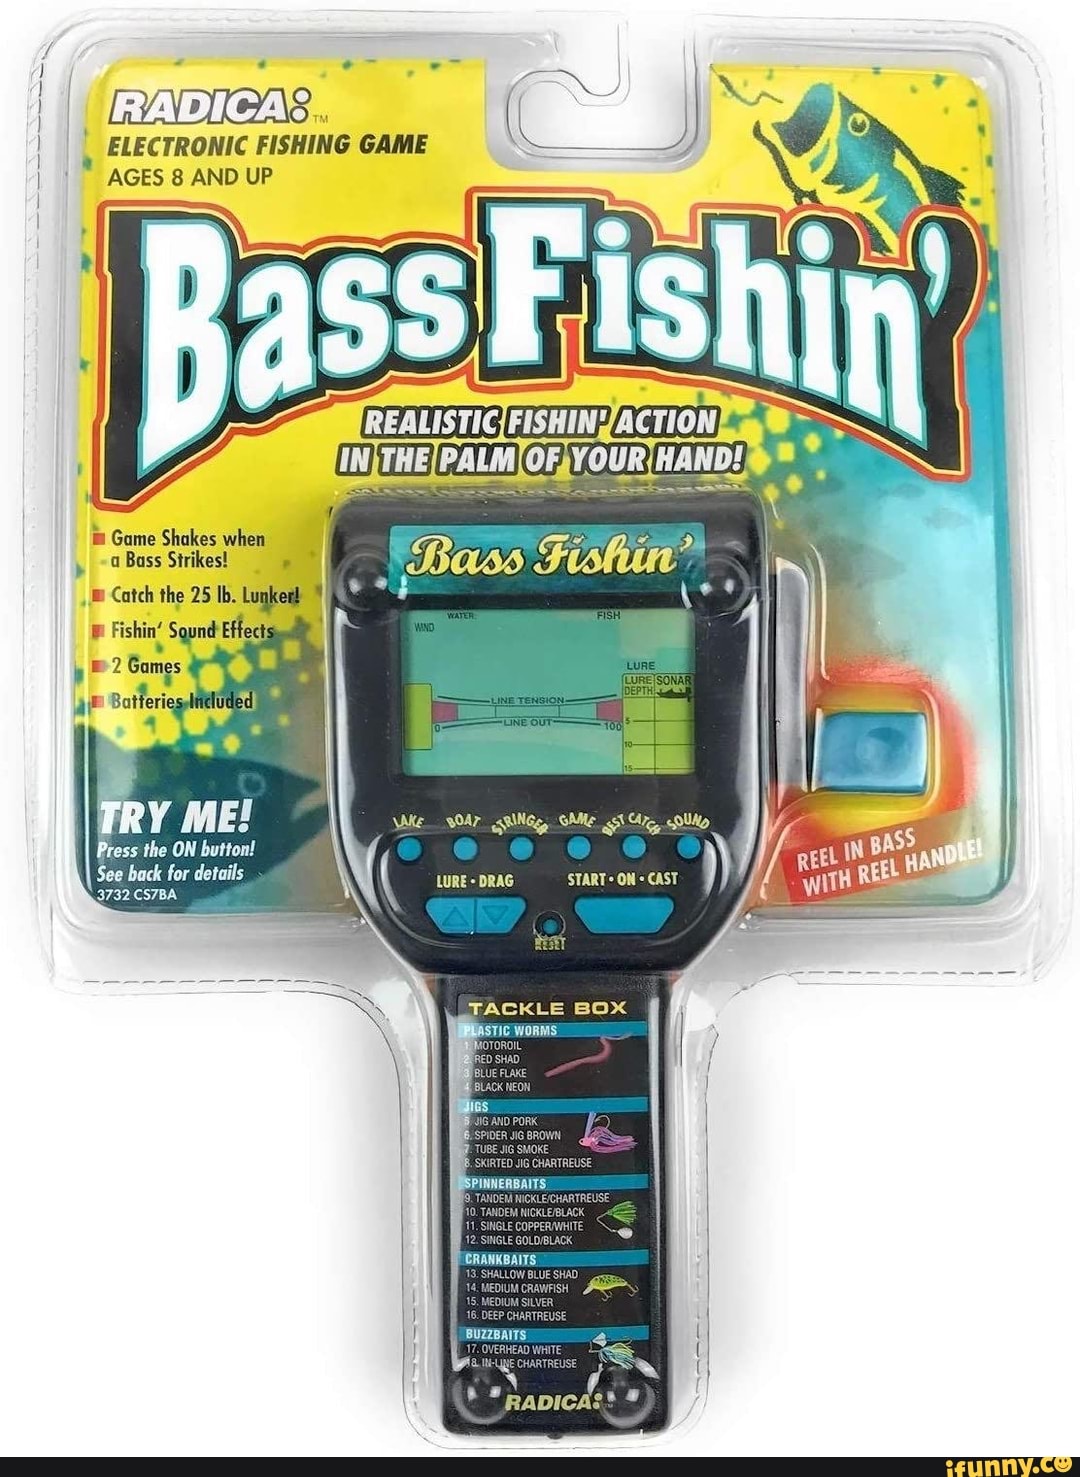 RATS. I ELECTRONIC FISHING GAME AGES 8 AND UP Game Shakes when a Bass  Strikes! Catch